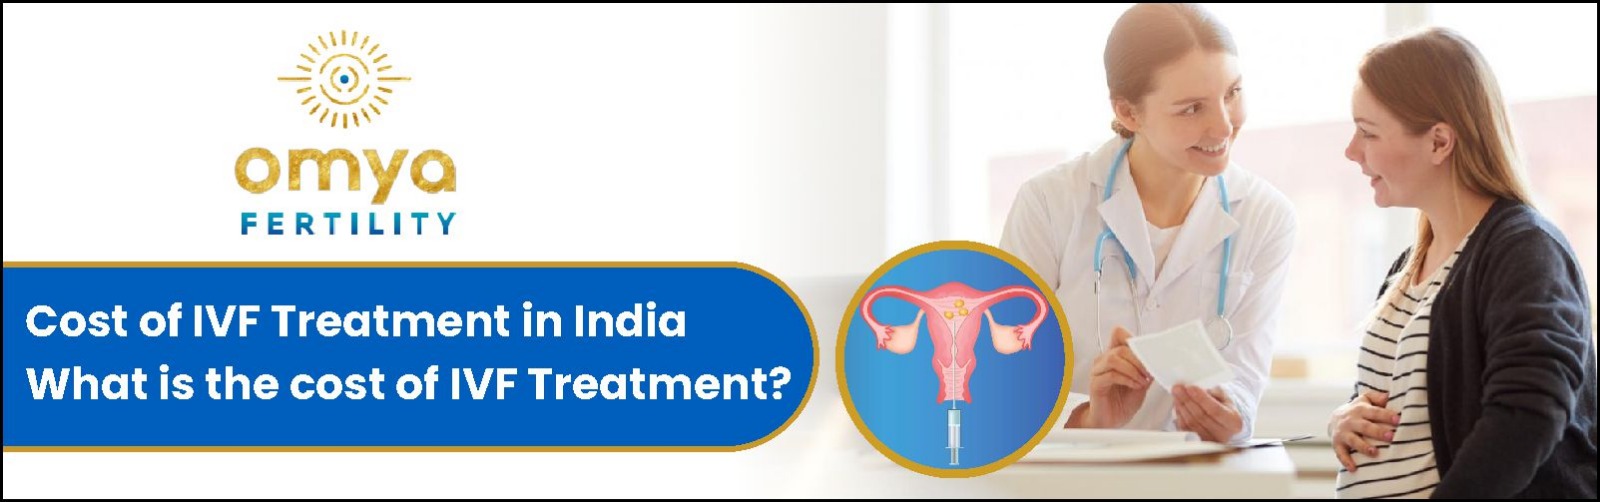 Cost of IVF Treatment in India: What is the cost of IVF Treatment?